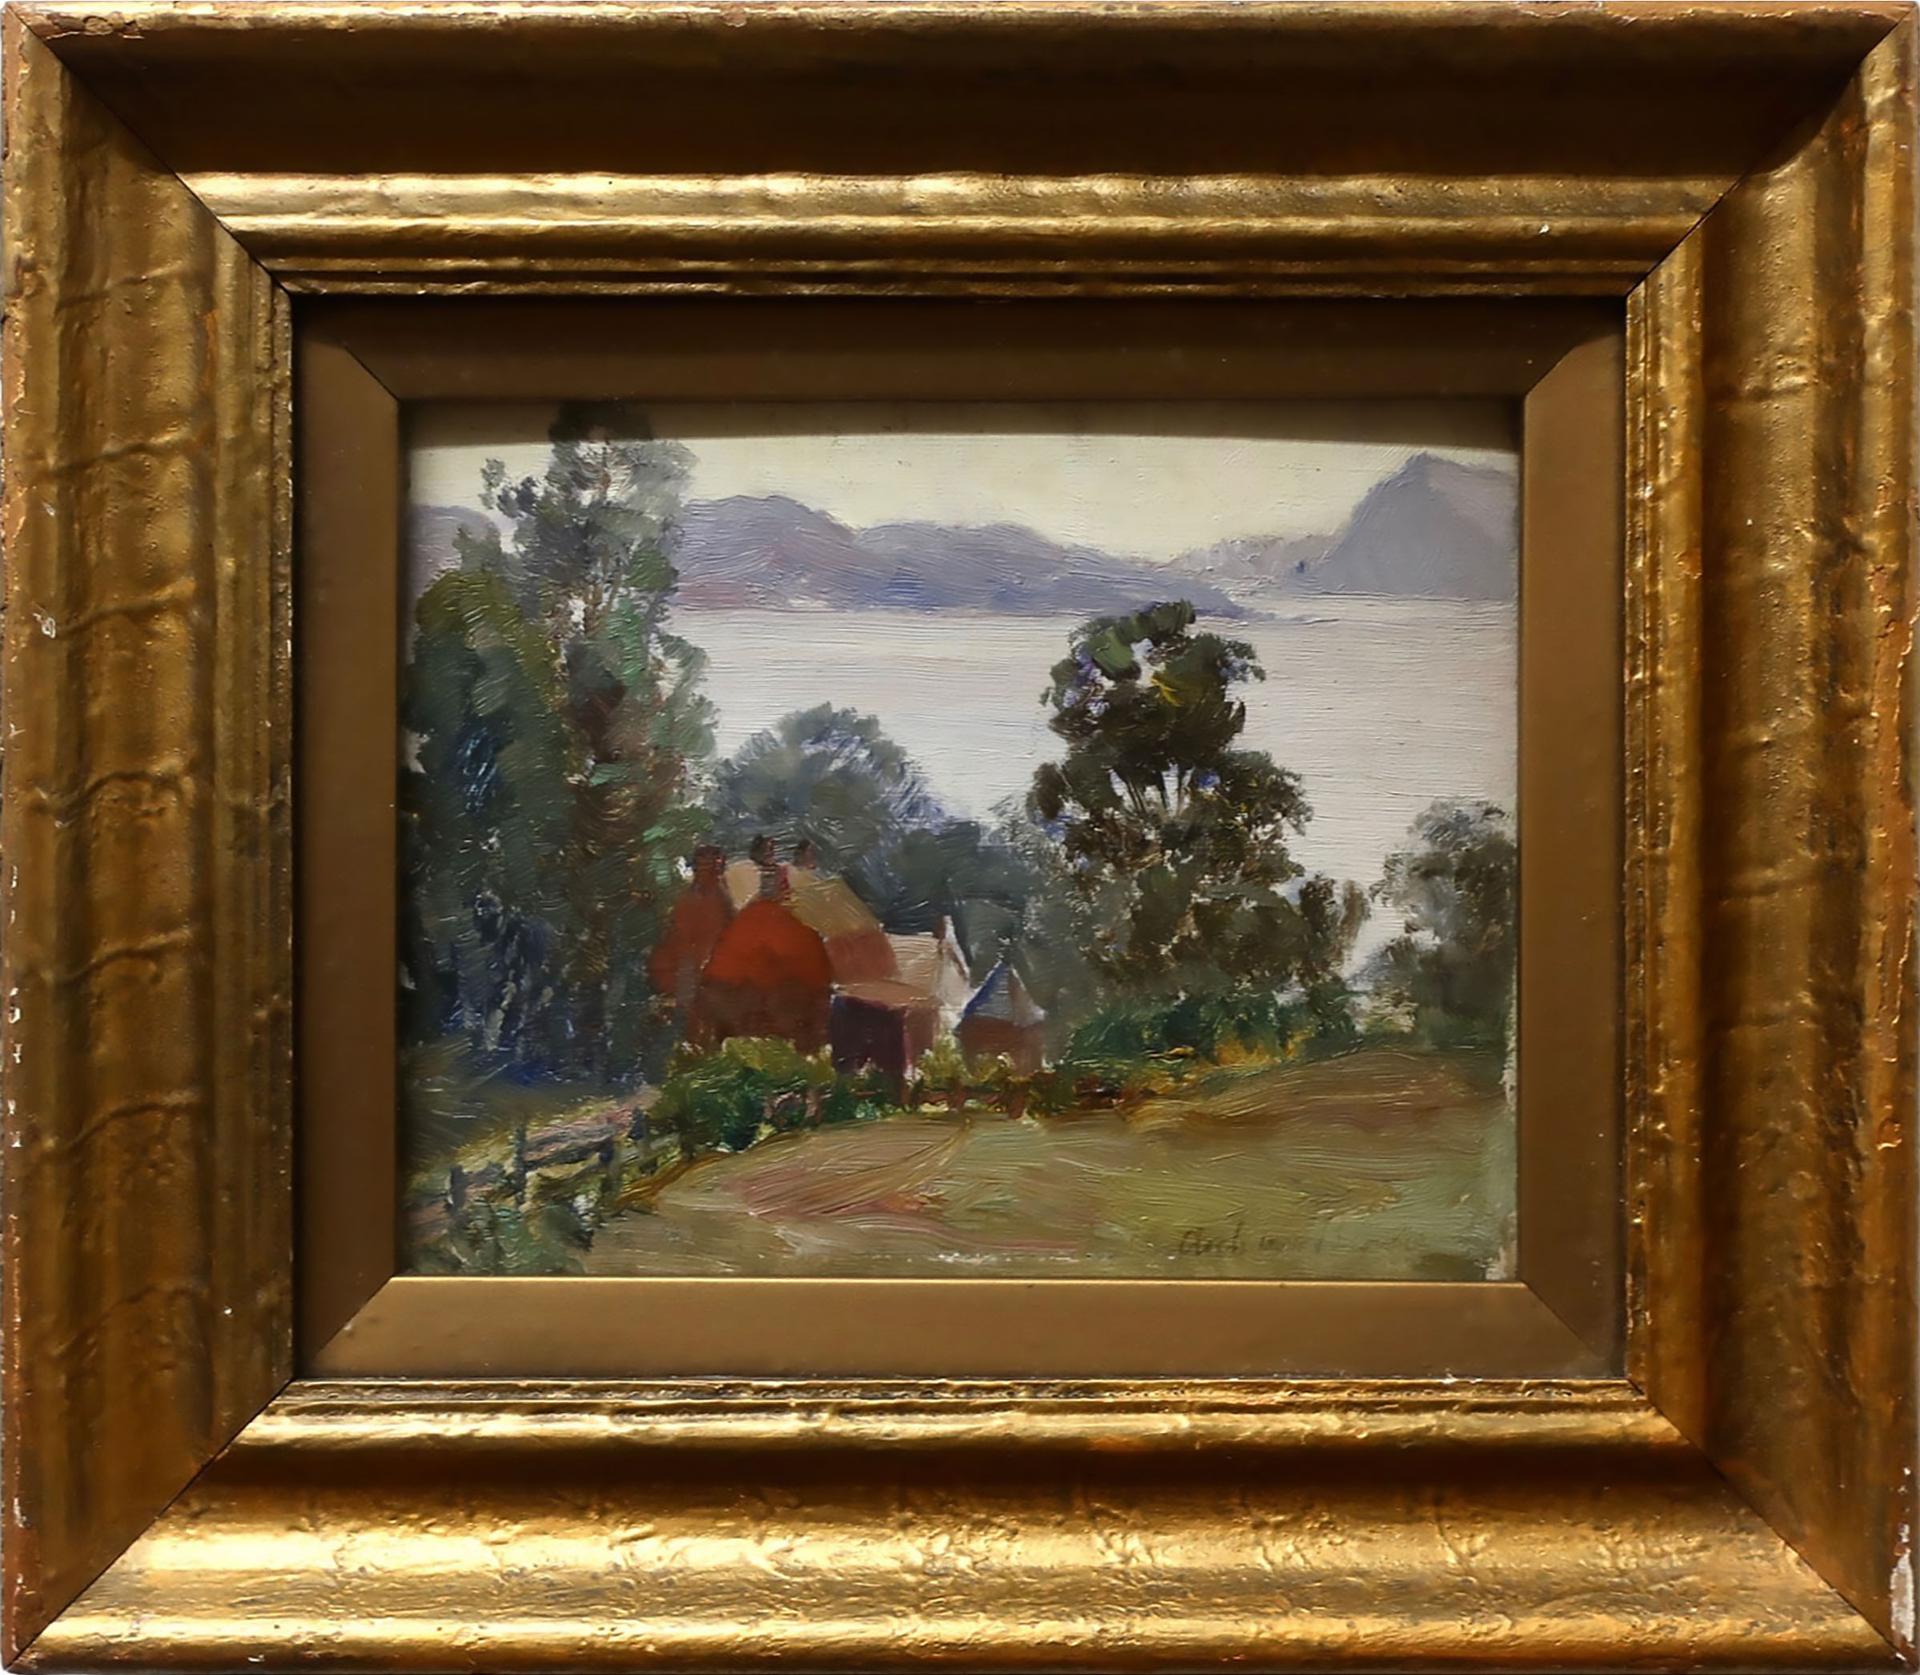 Joseph Archibald Browne (1862-1948) - Untitled (Red Farm House By Lake)